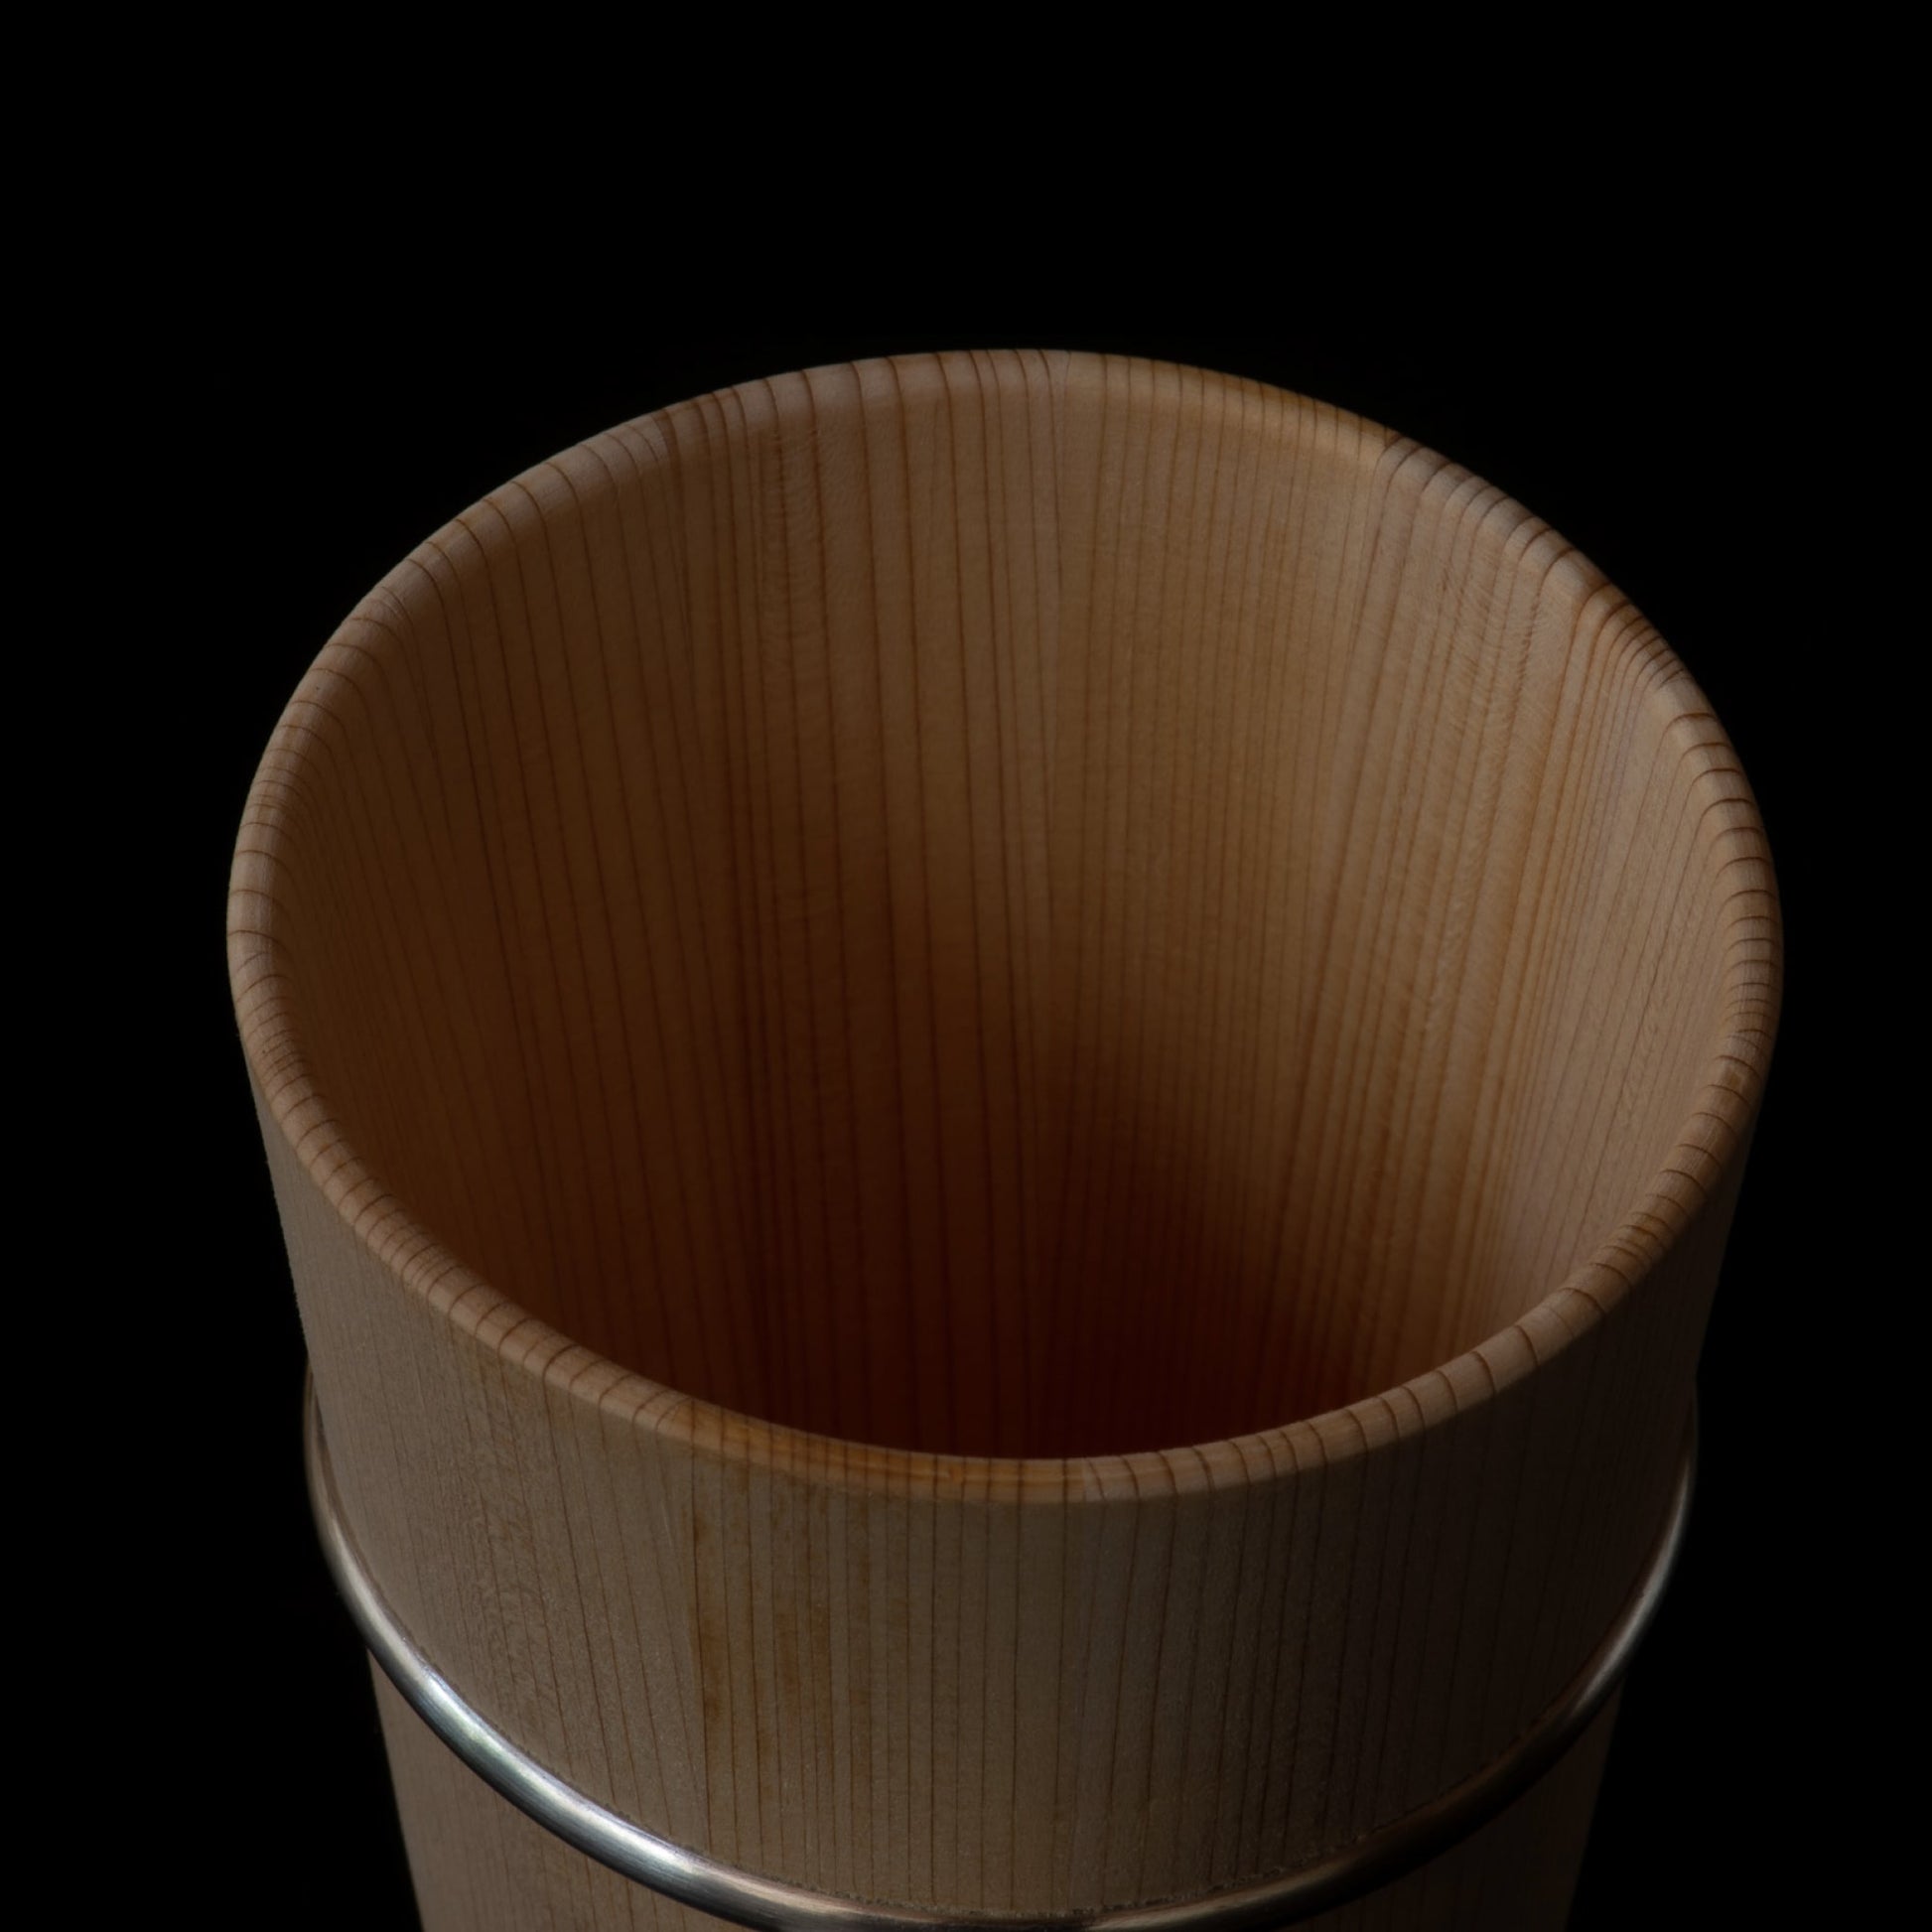 Detail view inside wooden Hinoki cups